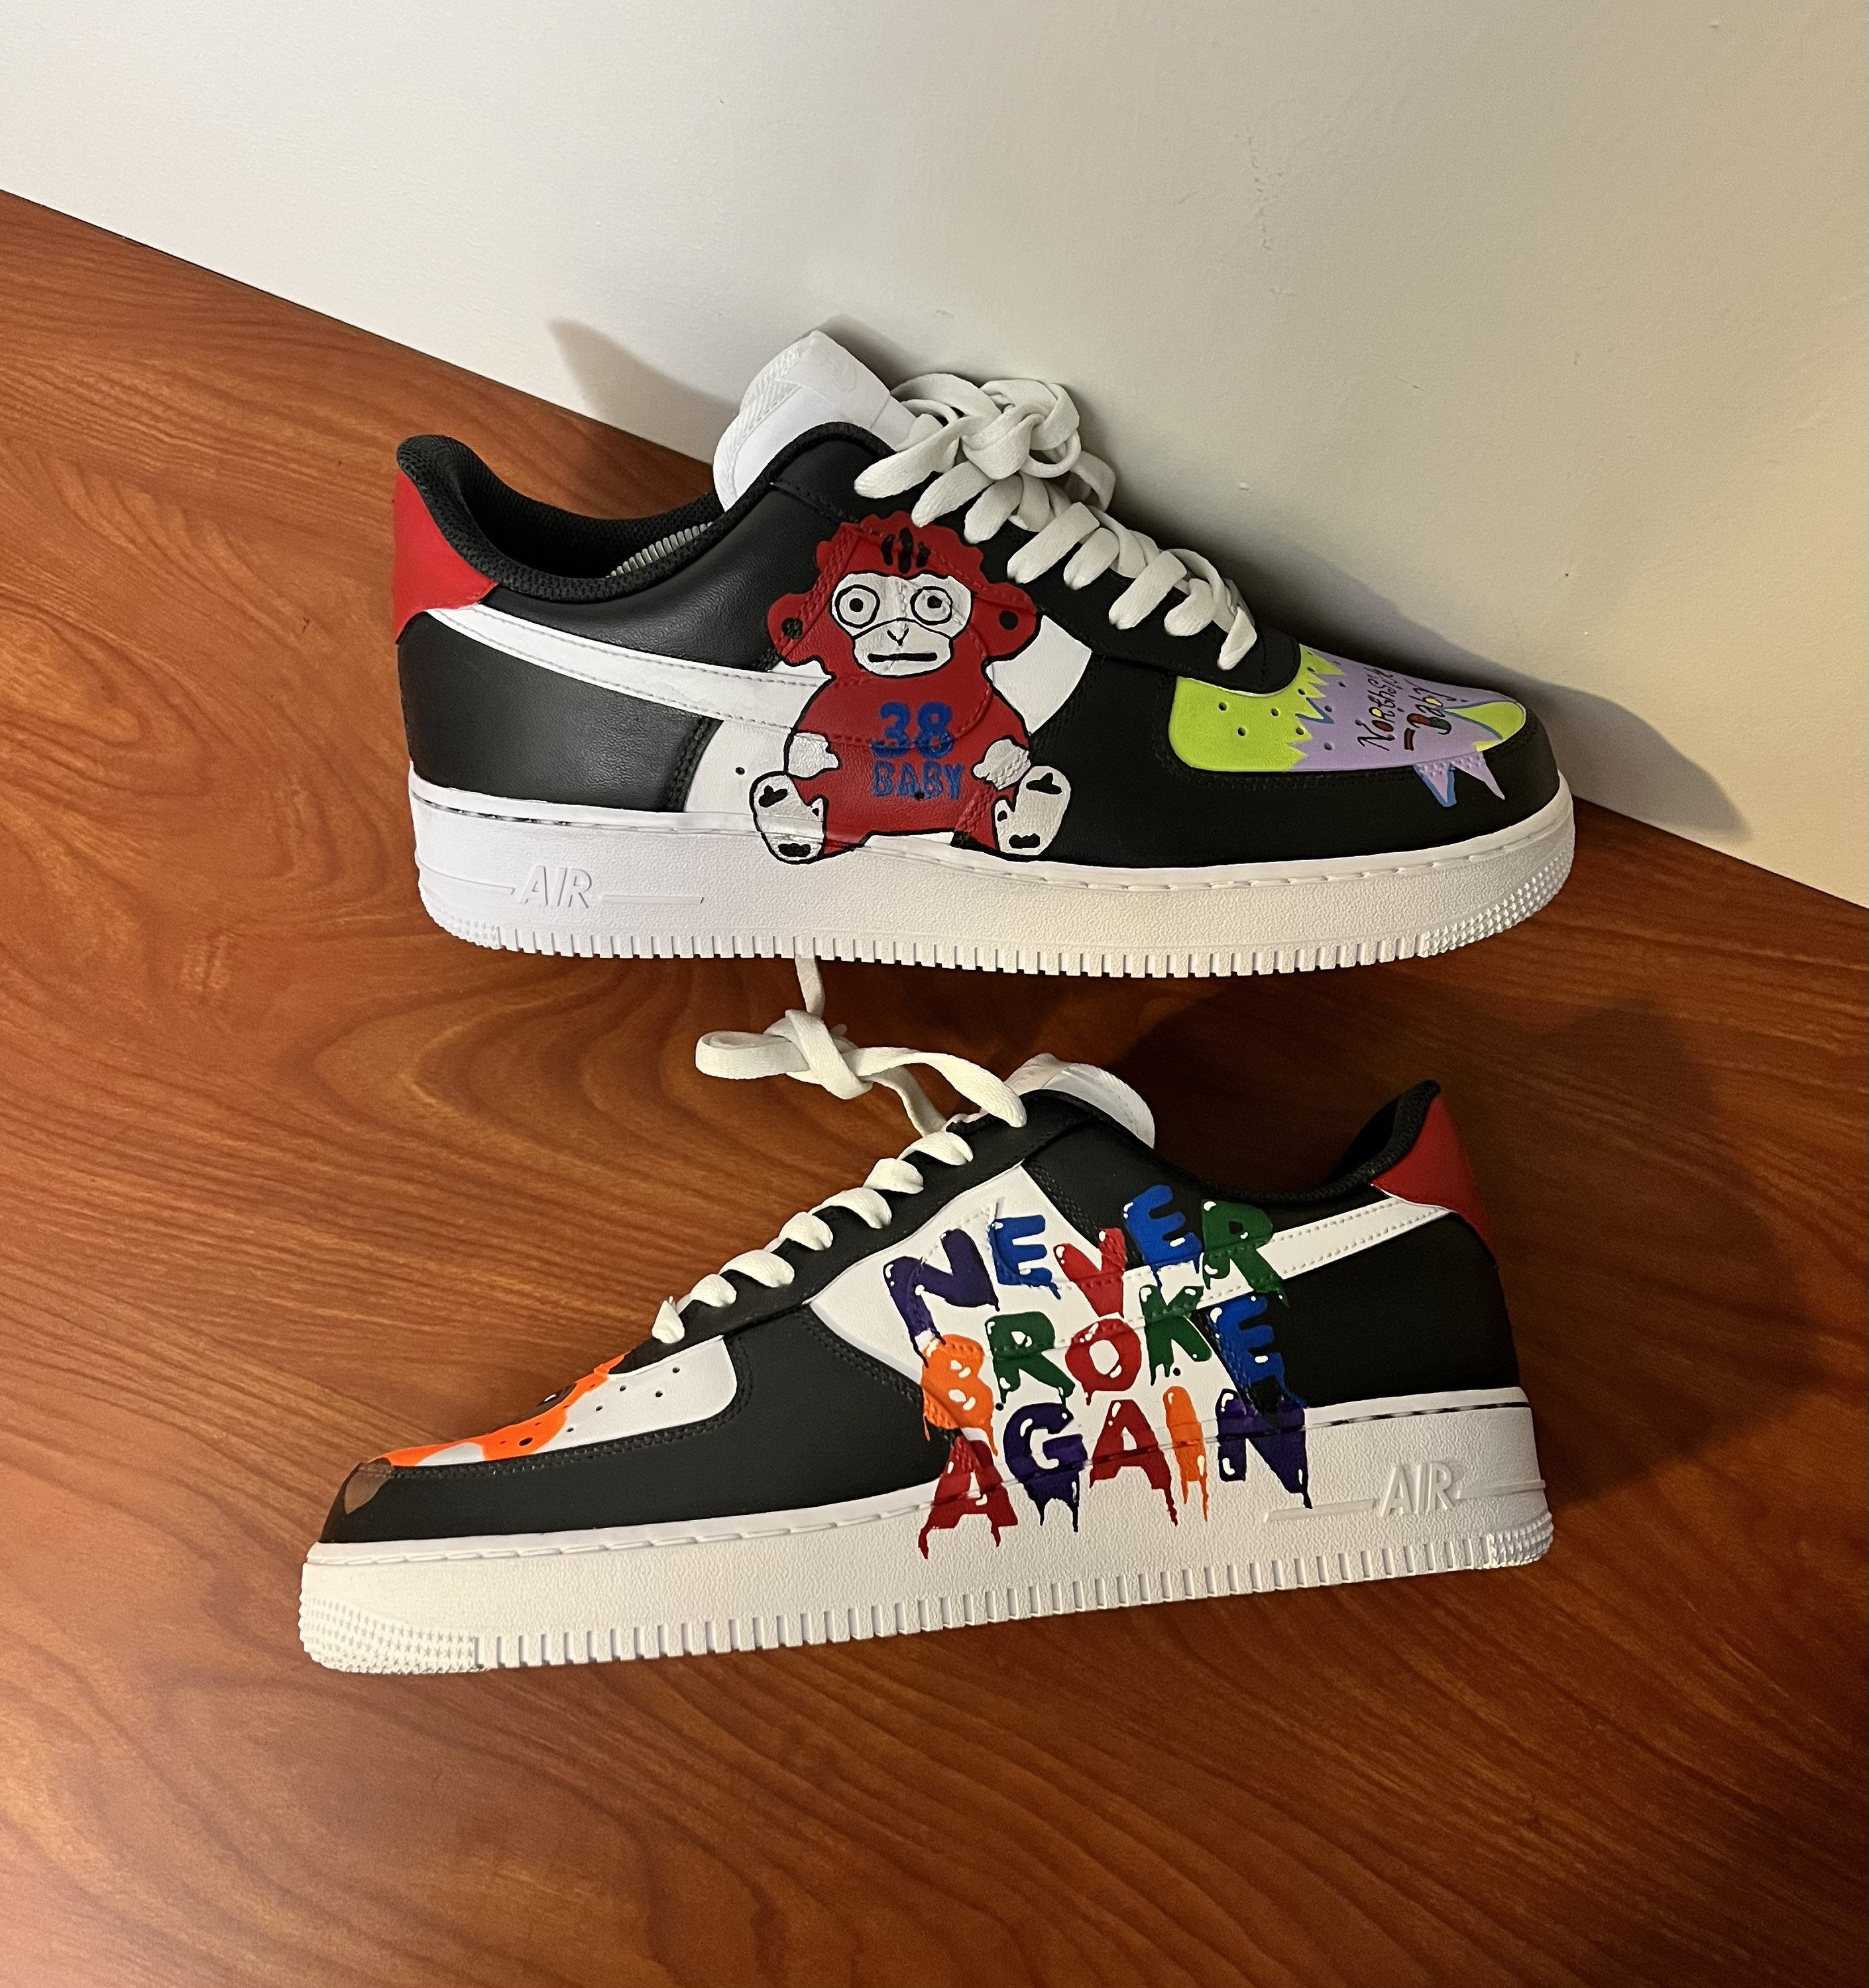 NBA Youngboy Custom Air Force One Sneaker - Etsy